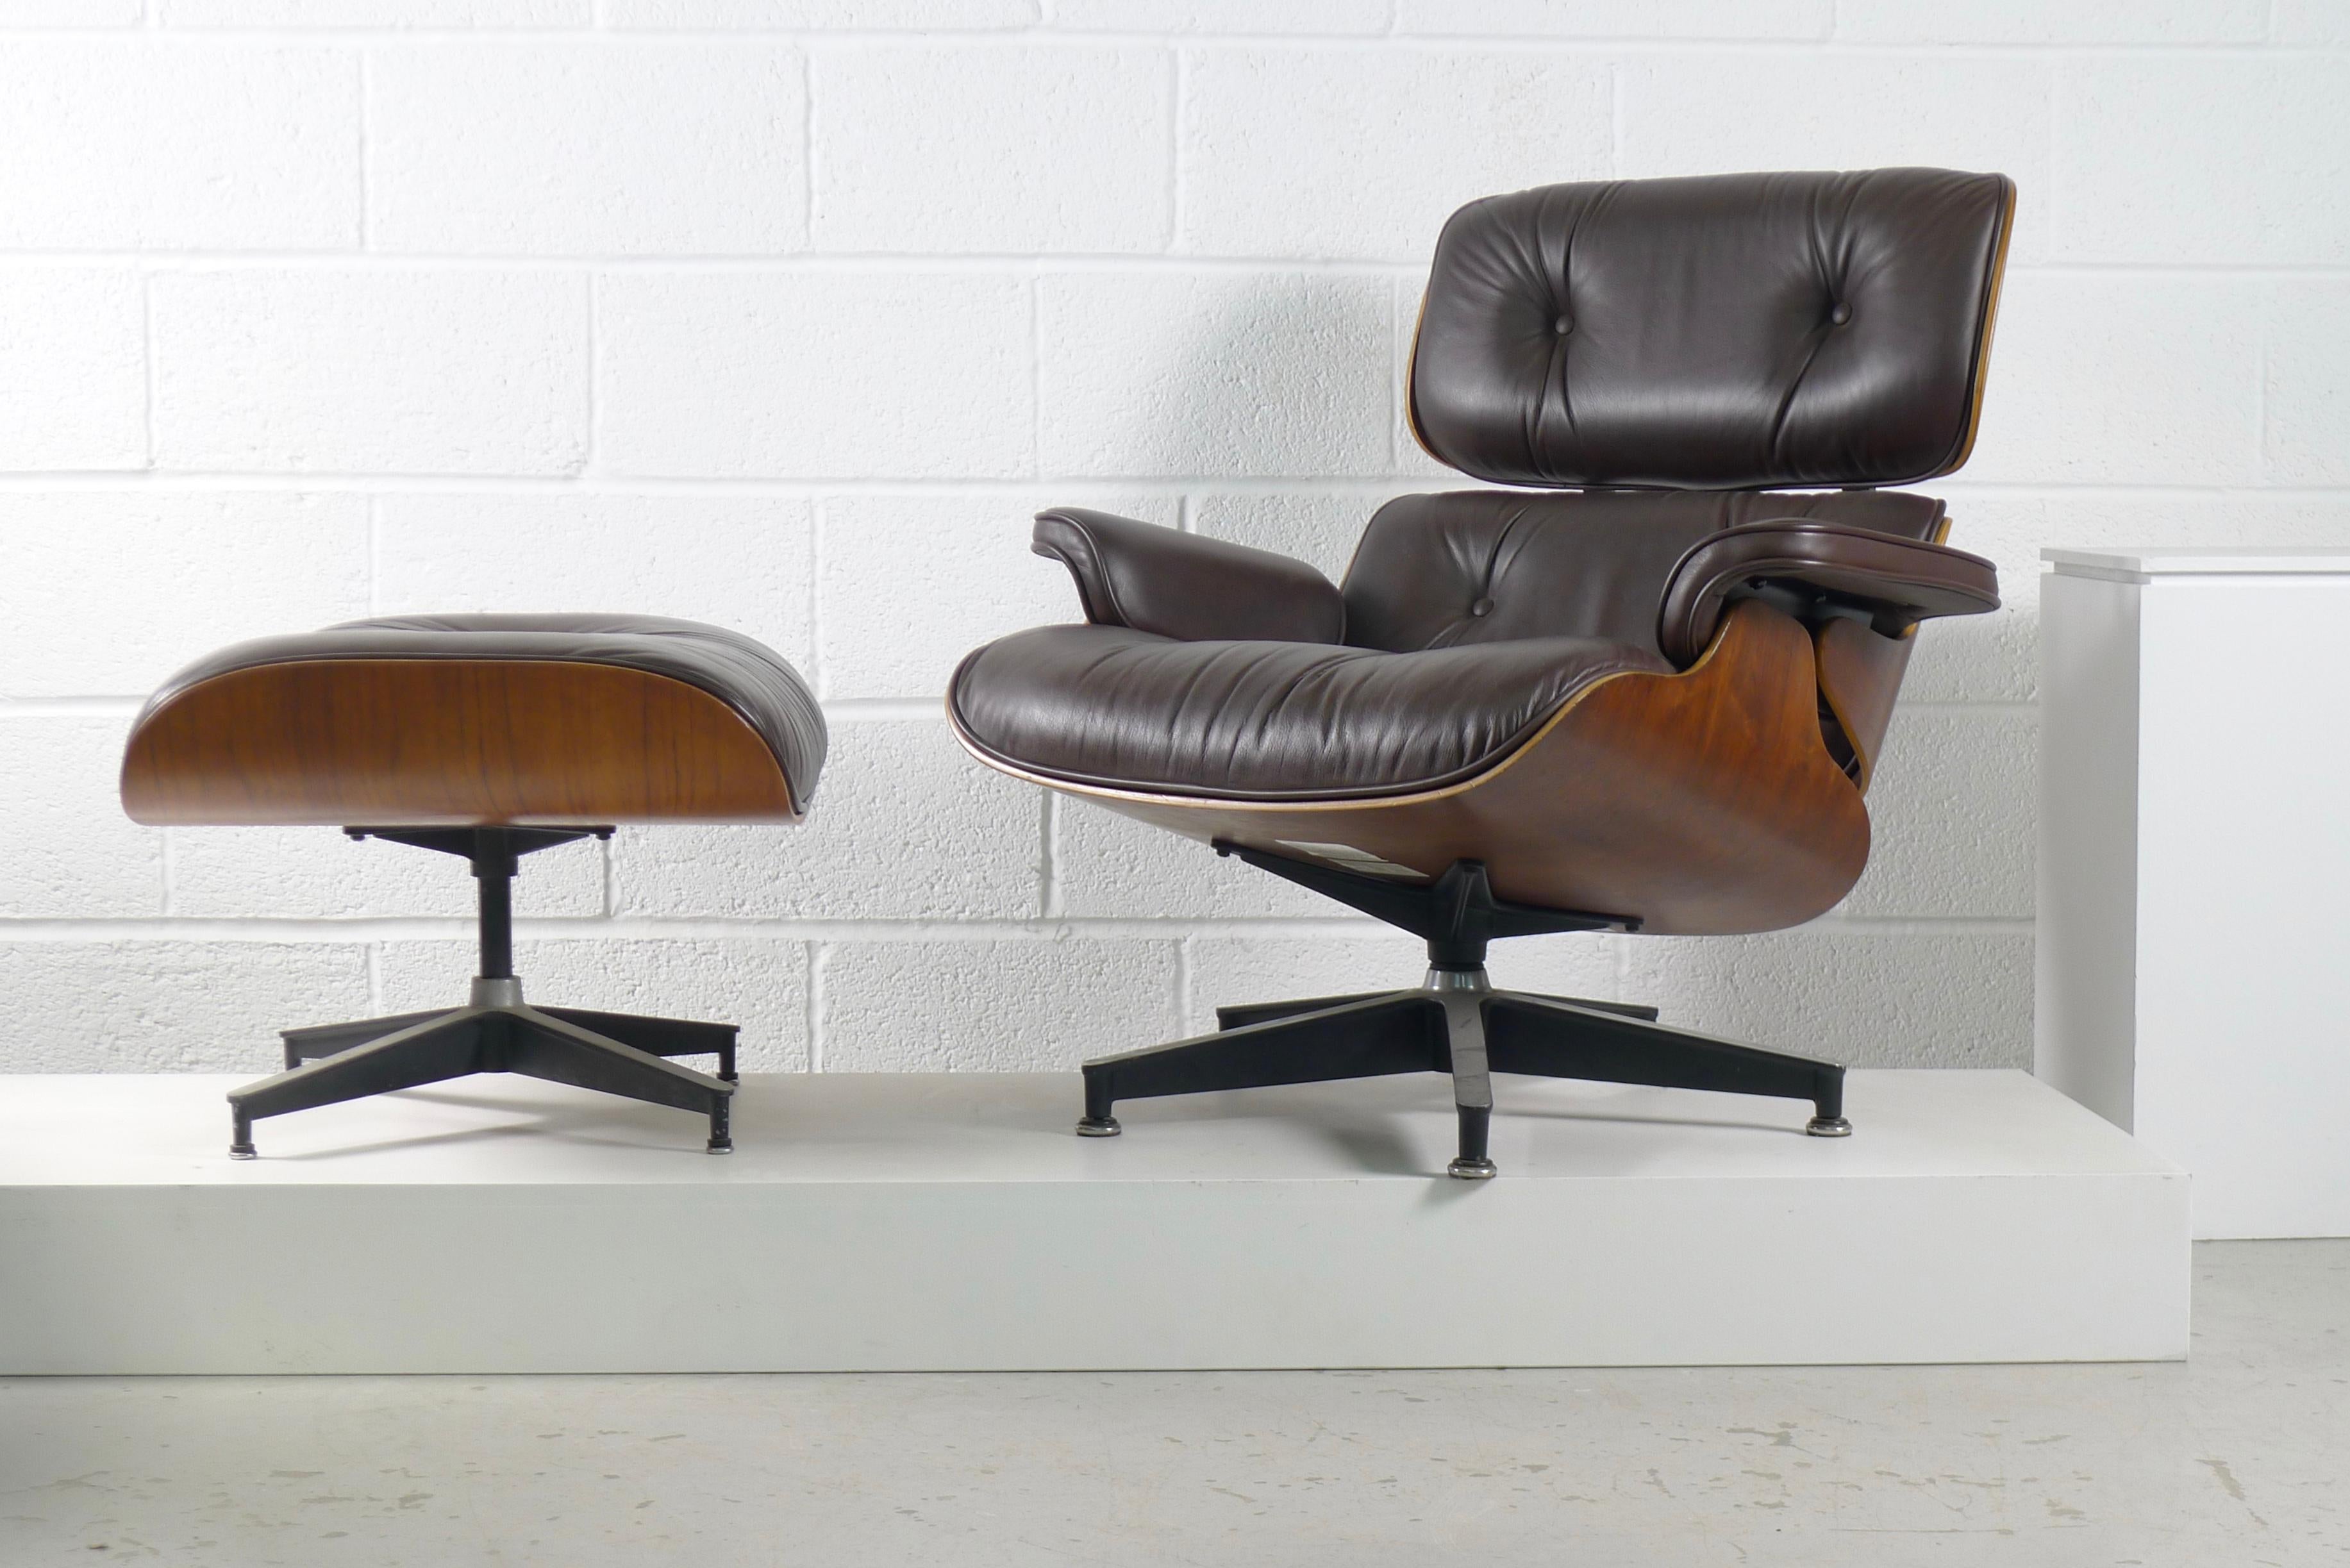 Late 20th Century Charles and Ray Eames, Rosewood Lounge Chair and Ottoman, Herman Miller, USA